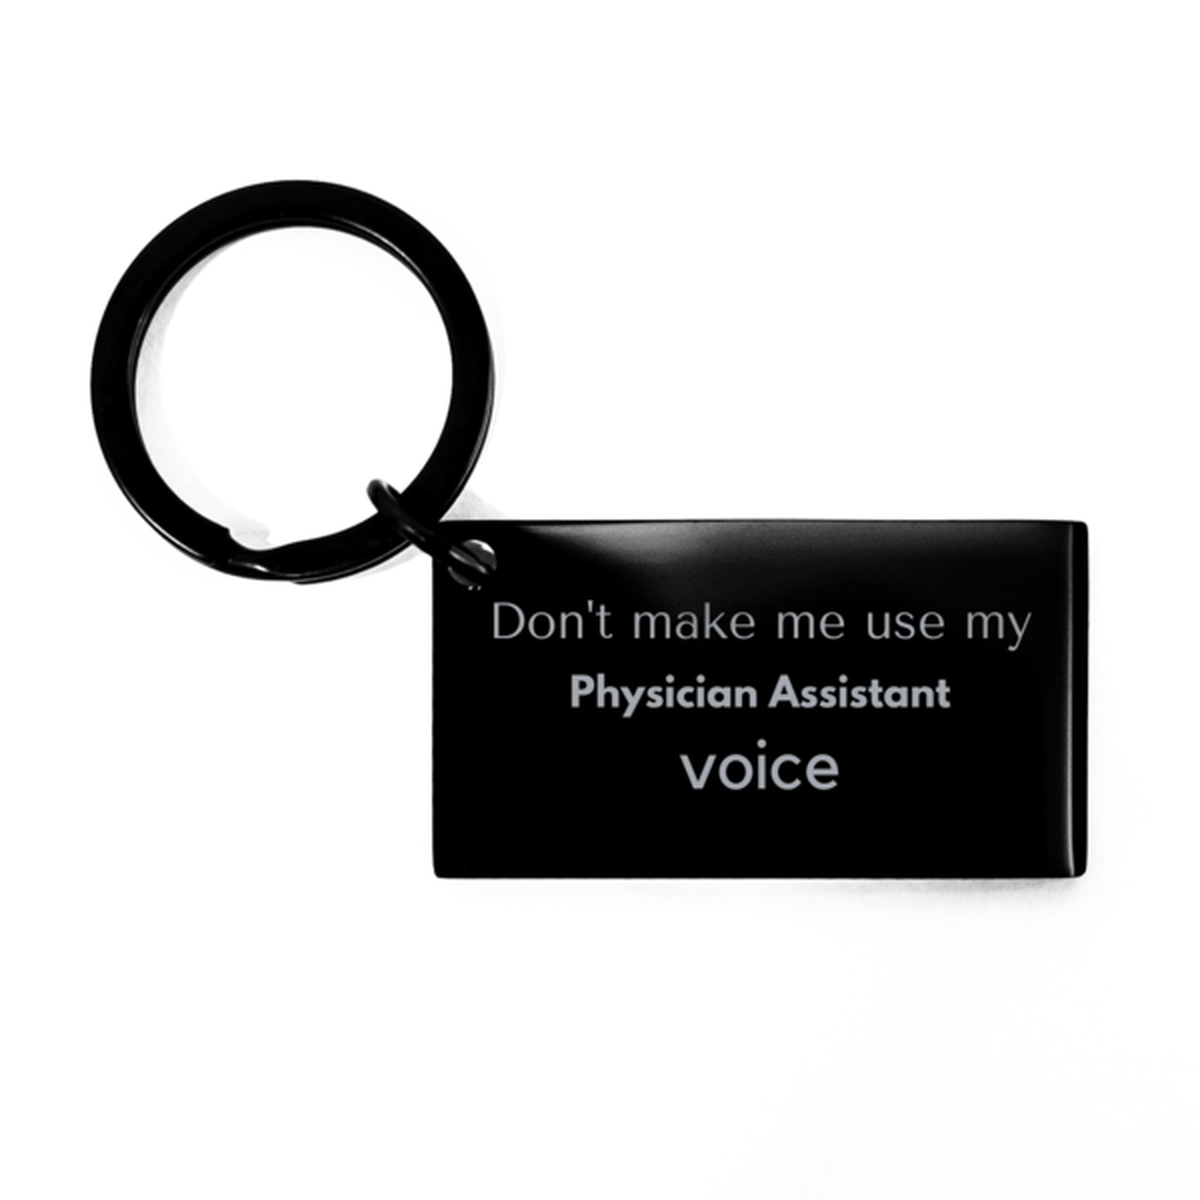 Don't make me use my Physician Assistant voice, Sarcasm Physician Assistant Gifts, Christmas Physician Assistant Keychain Birthday Unique Gifts For Physician Assistant Coworkers, Men, Women, Colleague, Friends